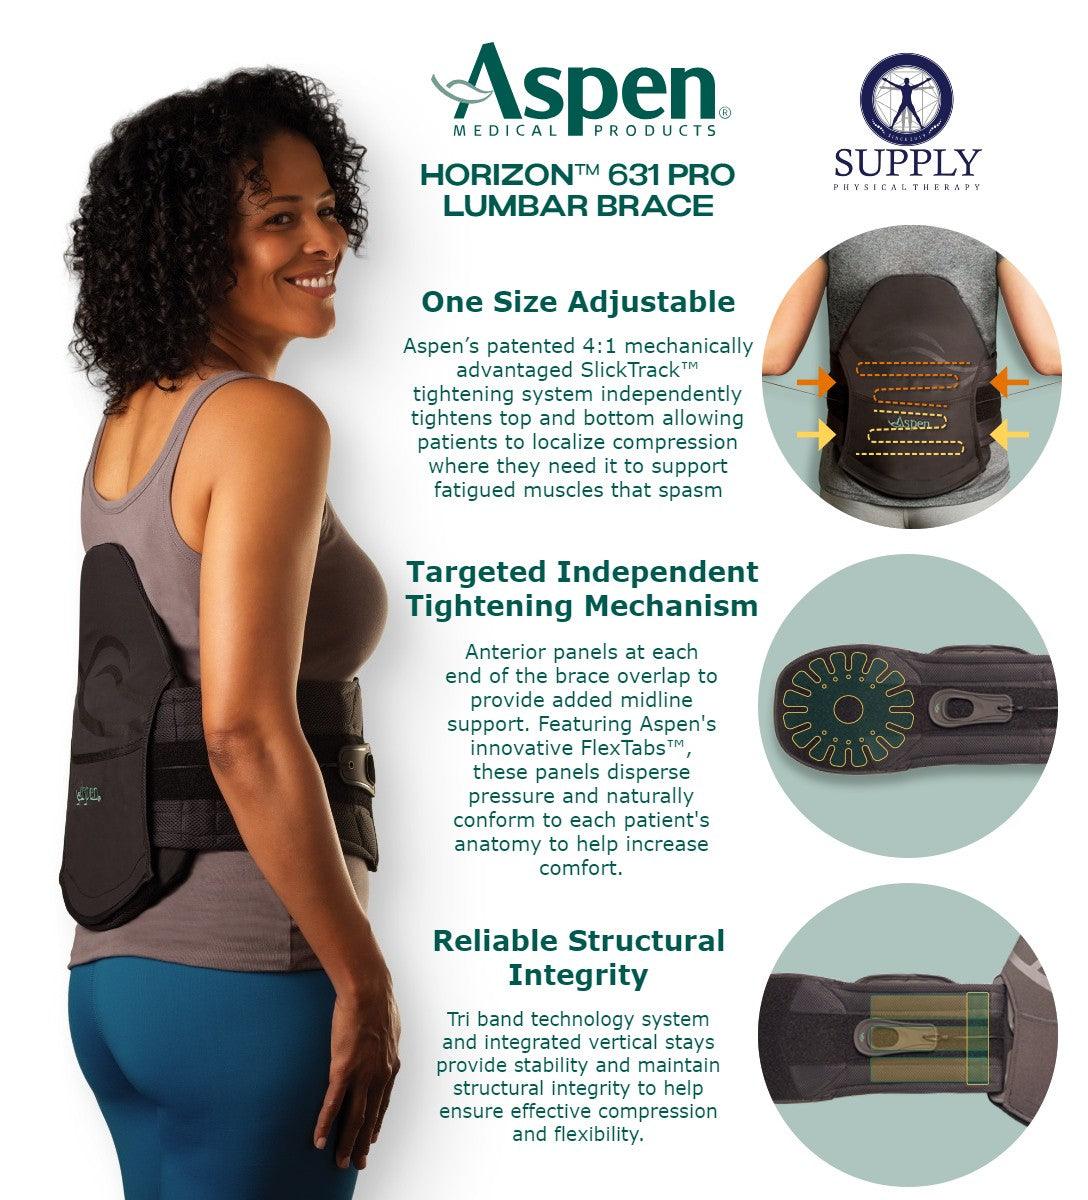 Shop 27 Orthopedic Bracing products at Supply Physical Therapy